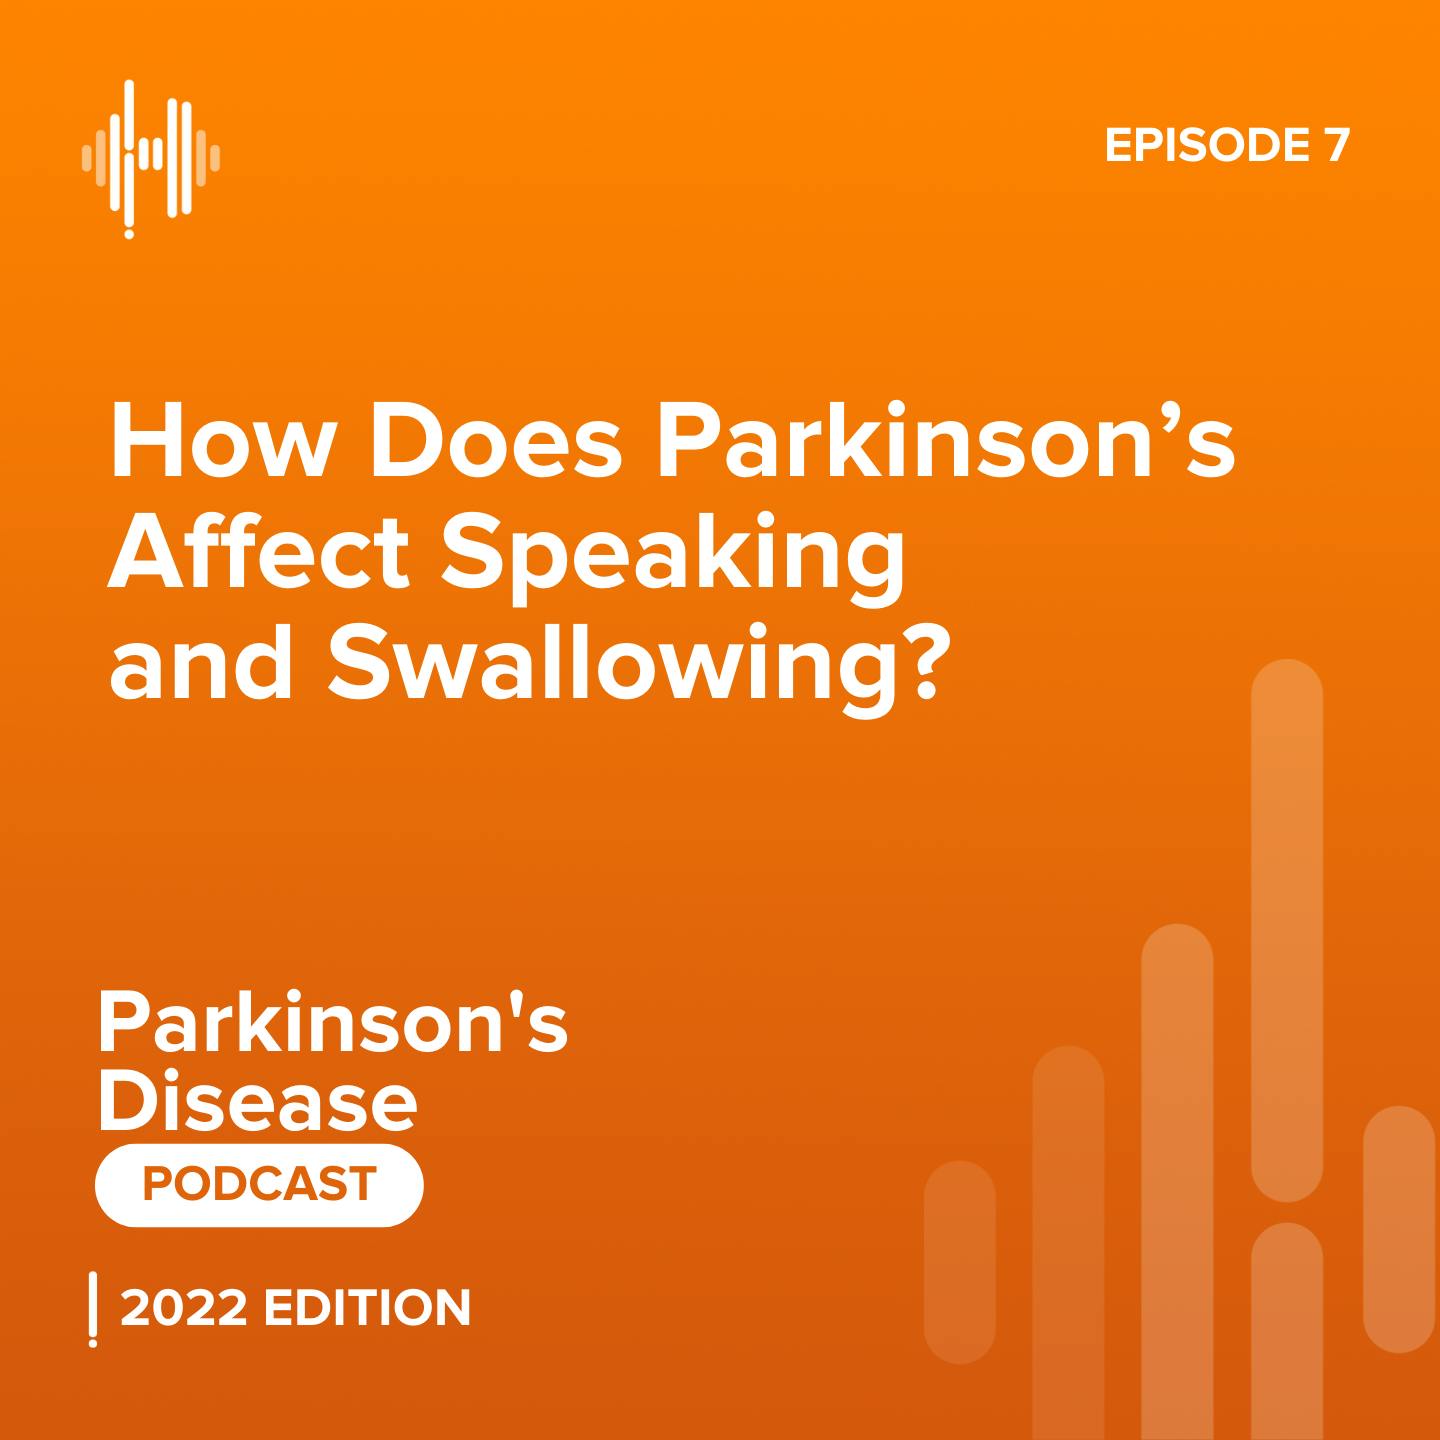 Ep 7: How Does Parkinson’s Affect Speaking and Swallowing? And What Can be Done About it?